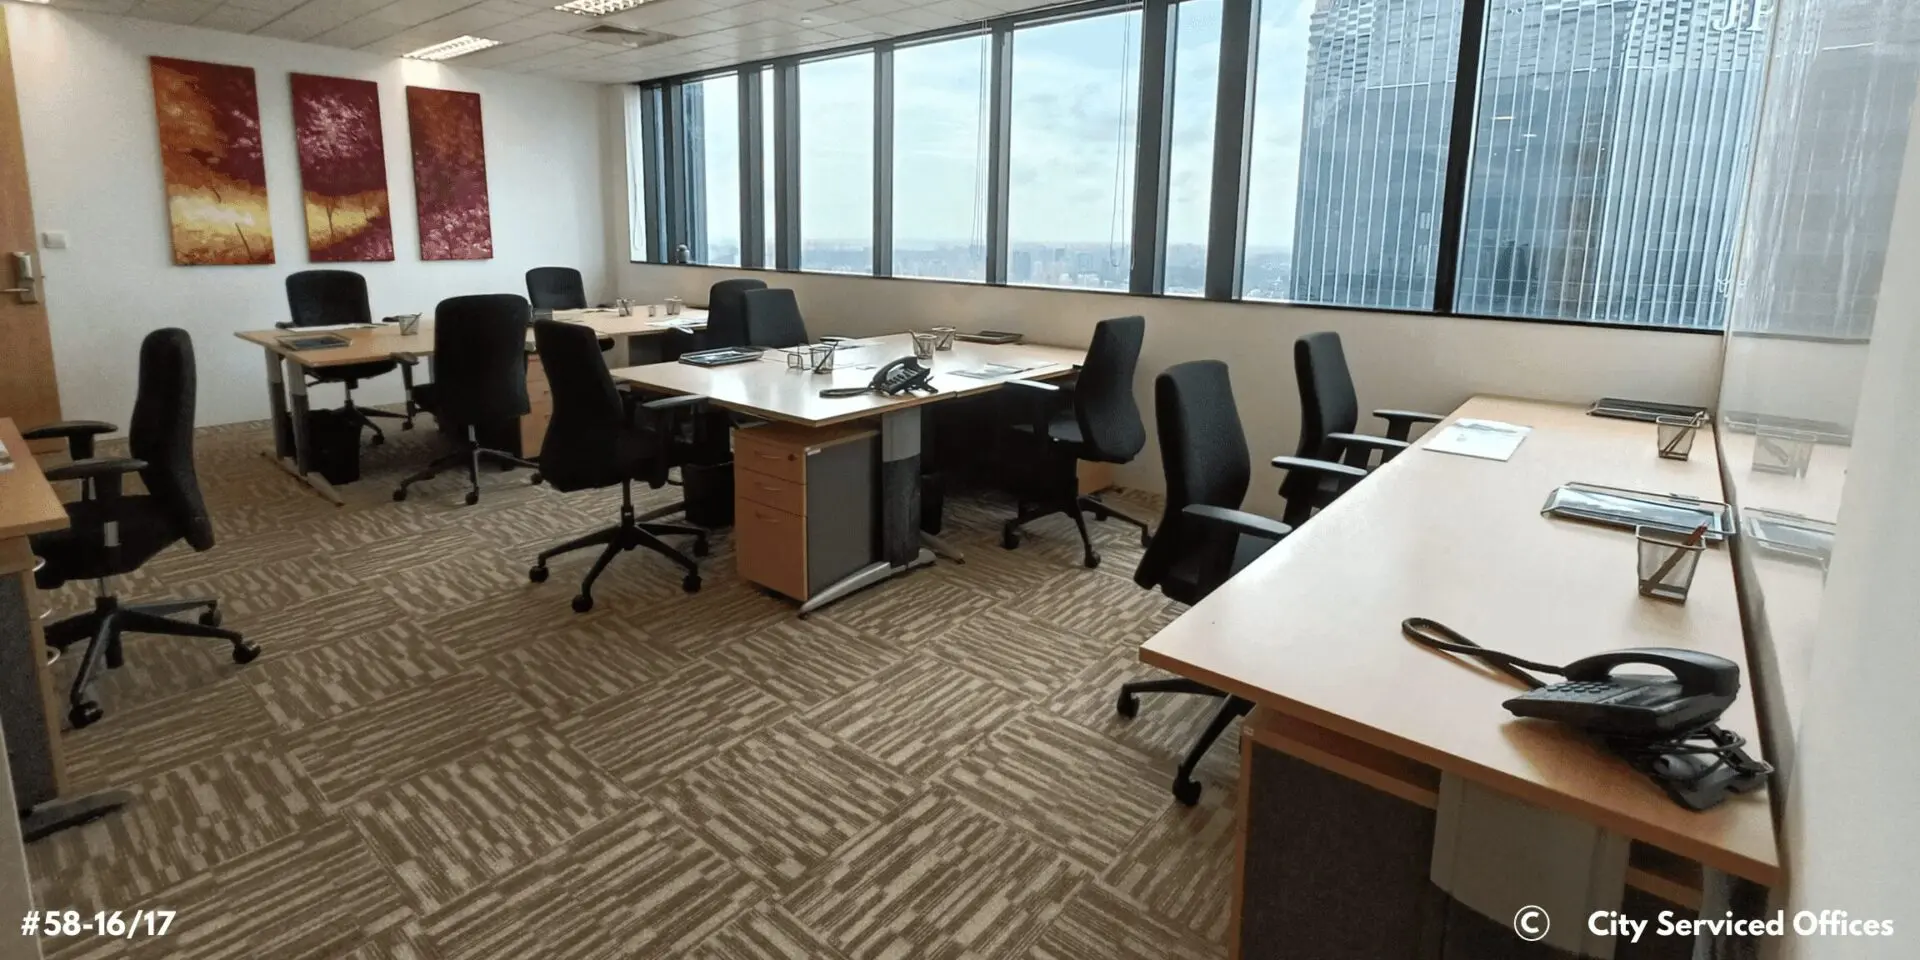 CITY SERVICED OFFICES – Republic Plaza Tower 1 Level 58